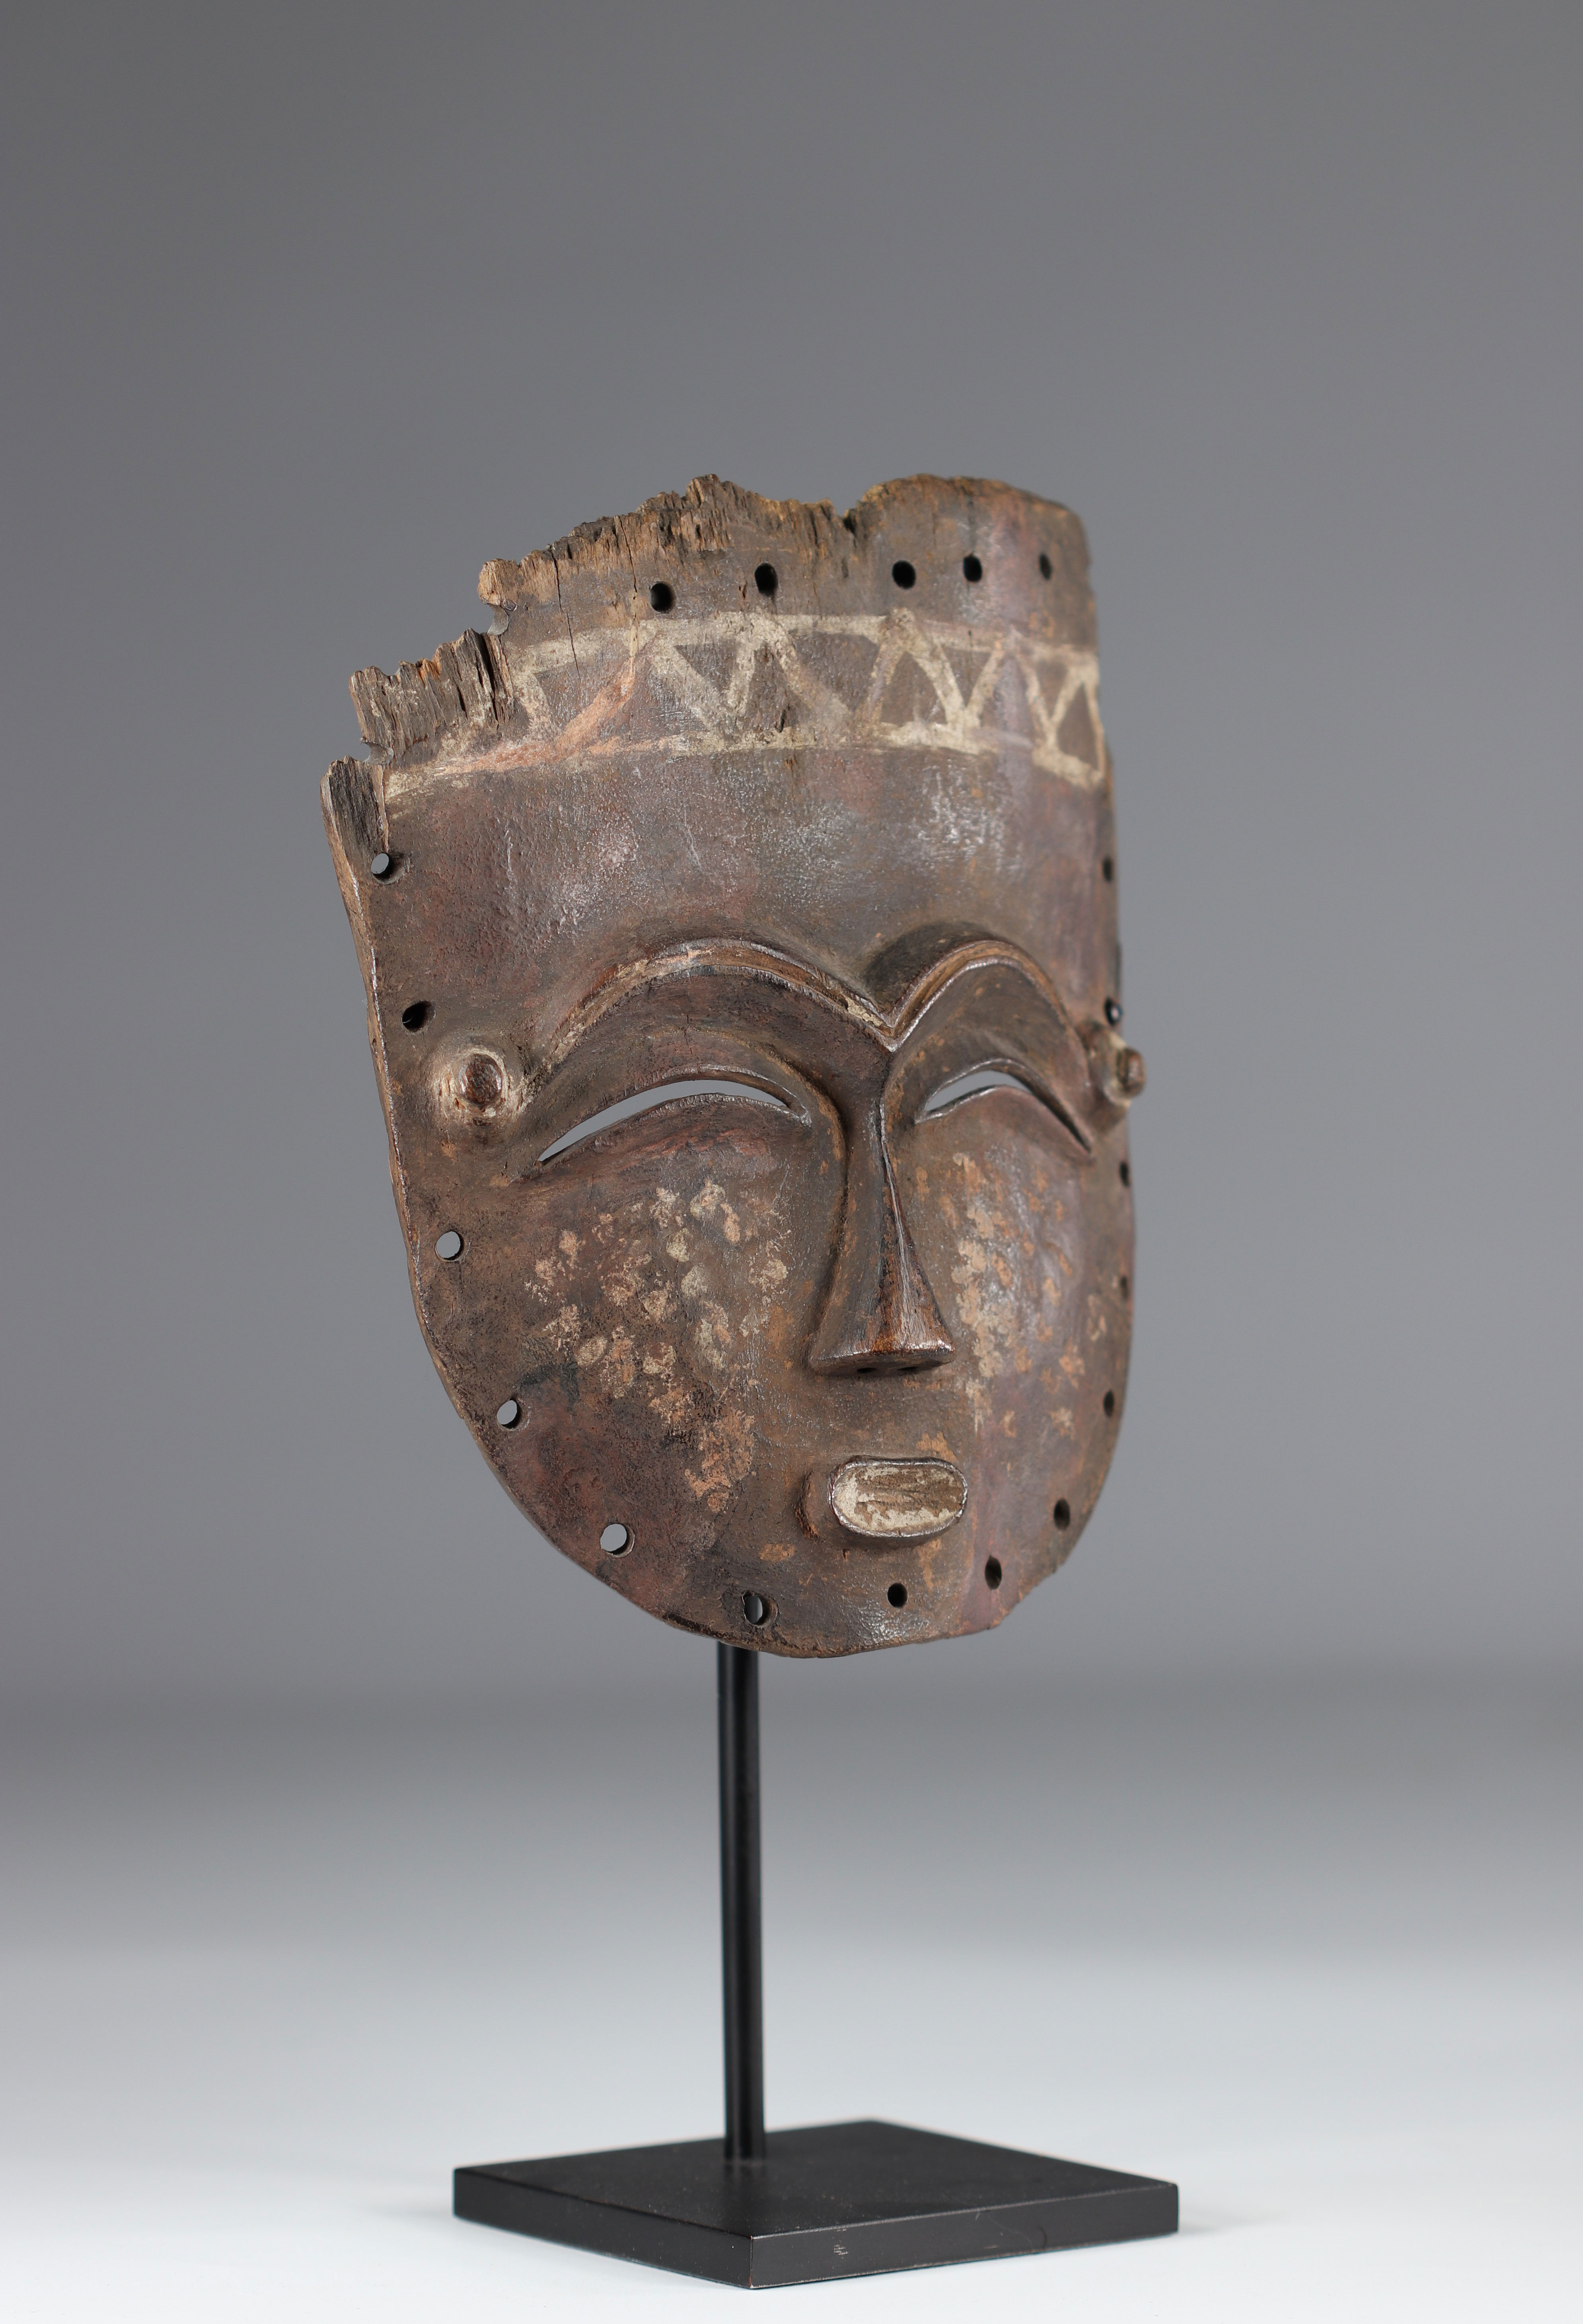 Rare and very old Lele mask - DRC, traces of use, natural pigments from the early 20th century - Image 2 of 5